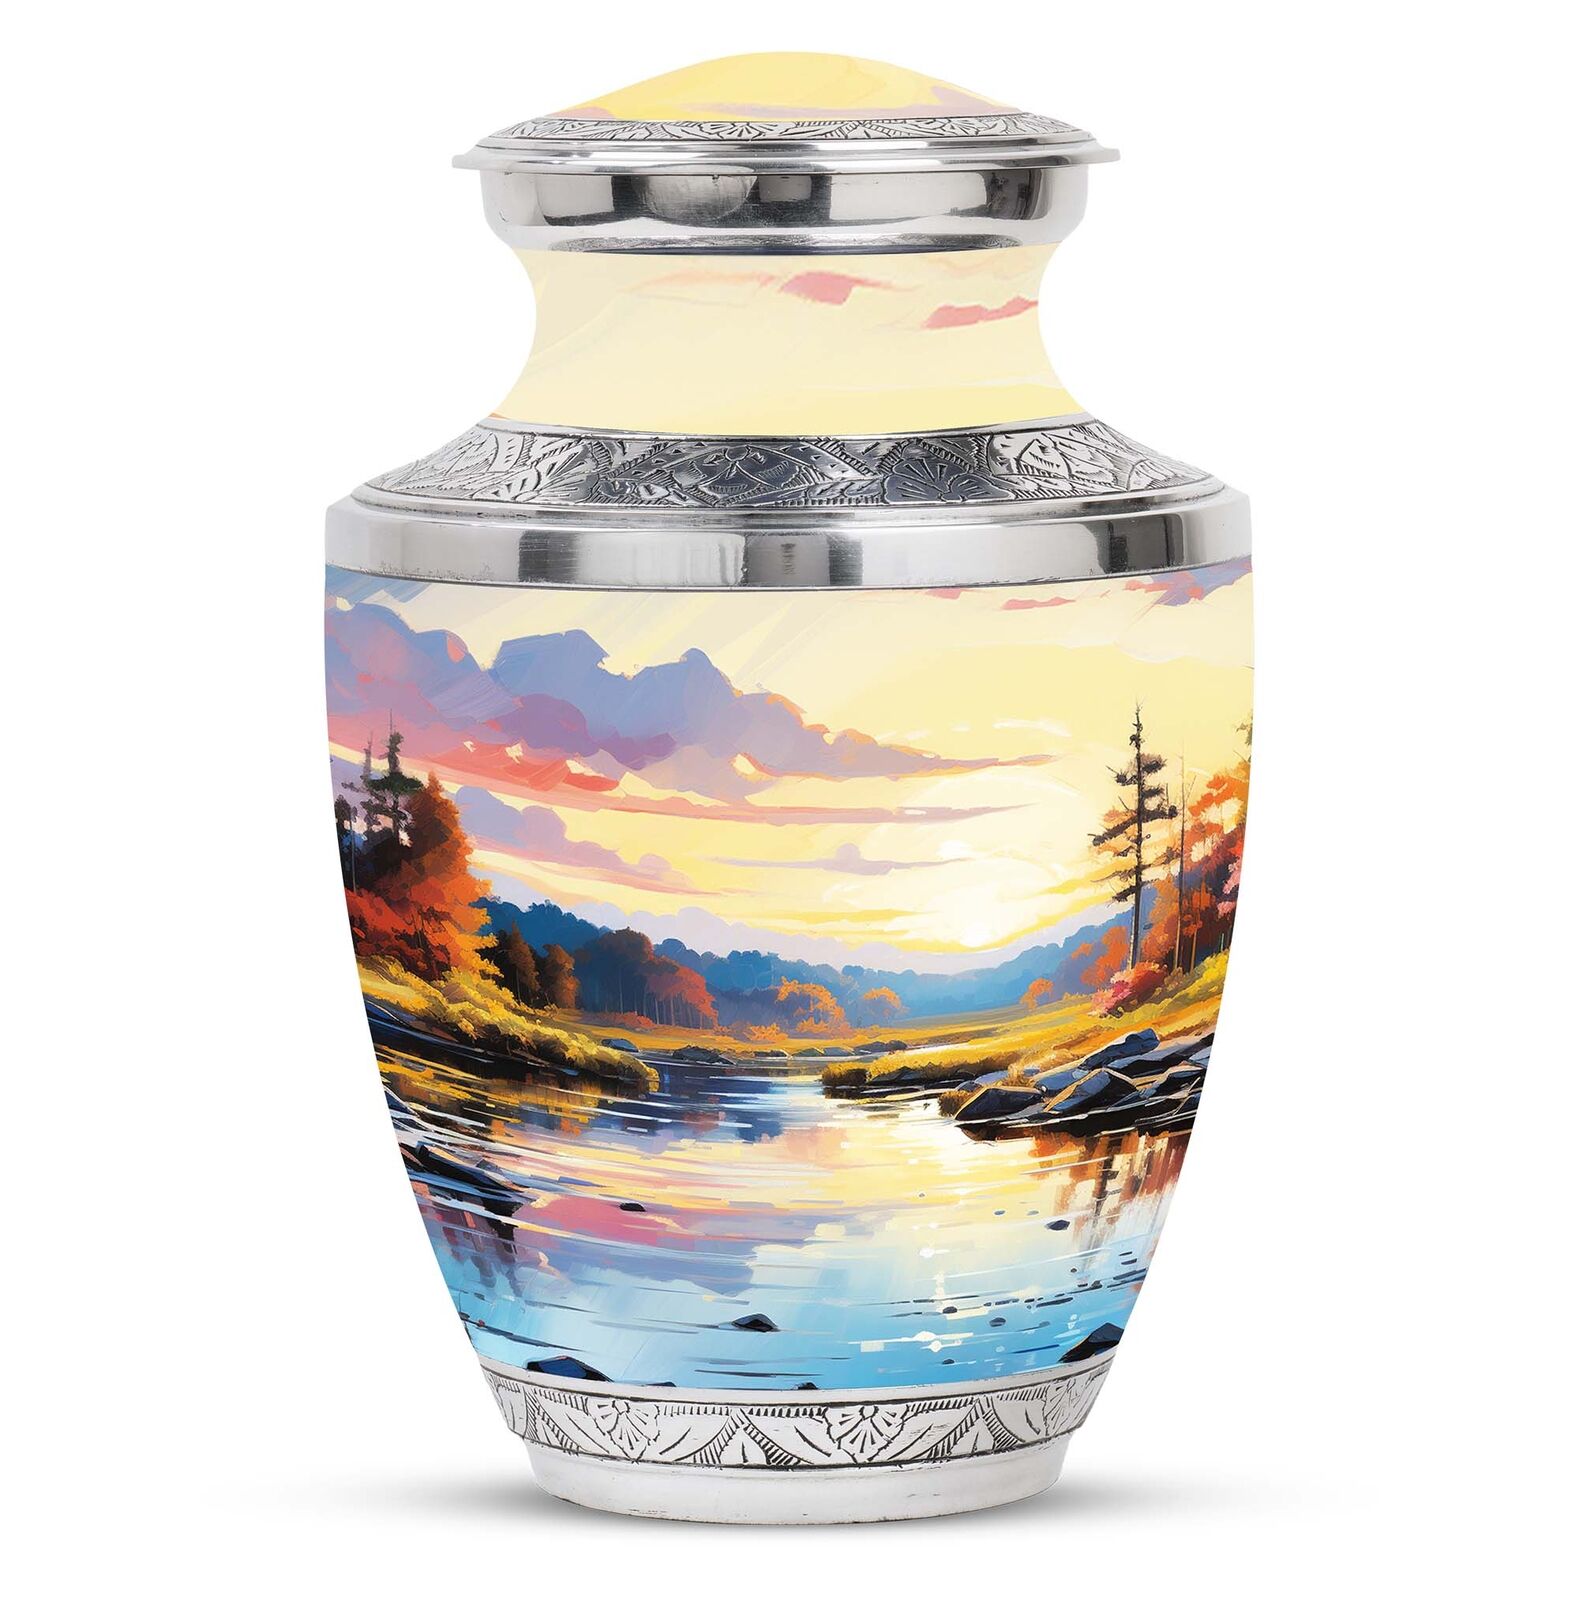 Dusk Descends on a Peaceful River Large Urns For Human Remains 200 cubic inch